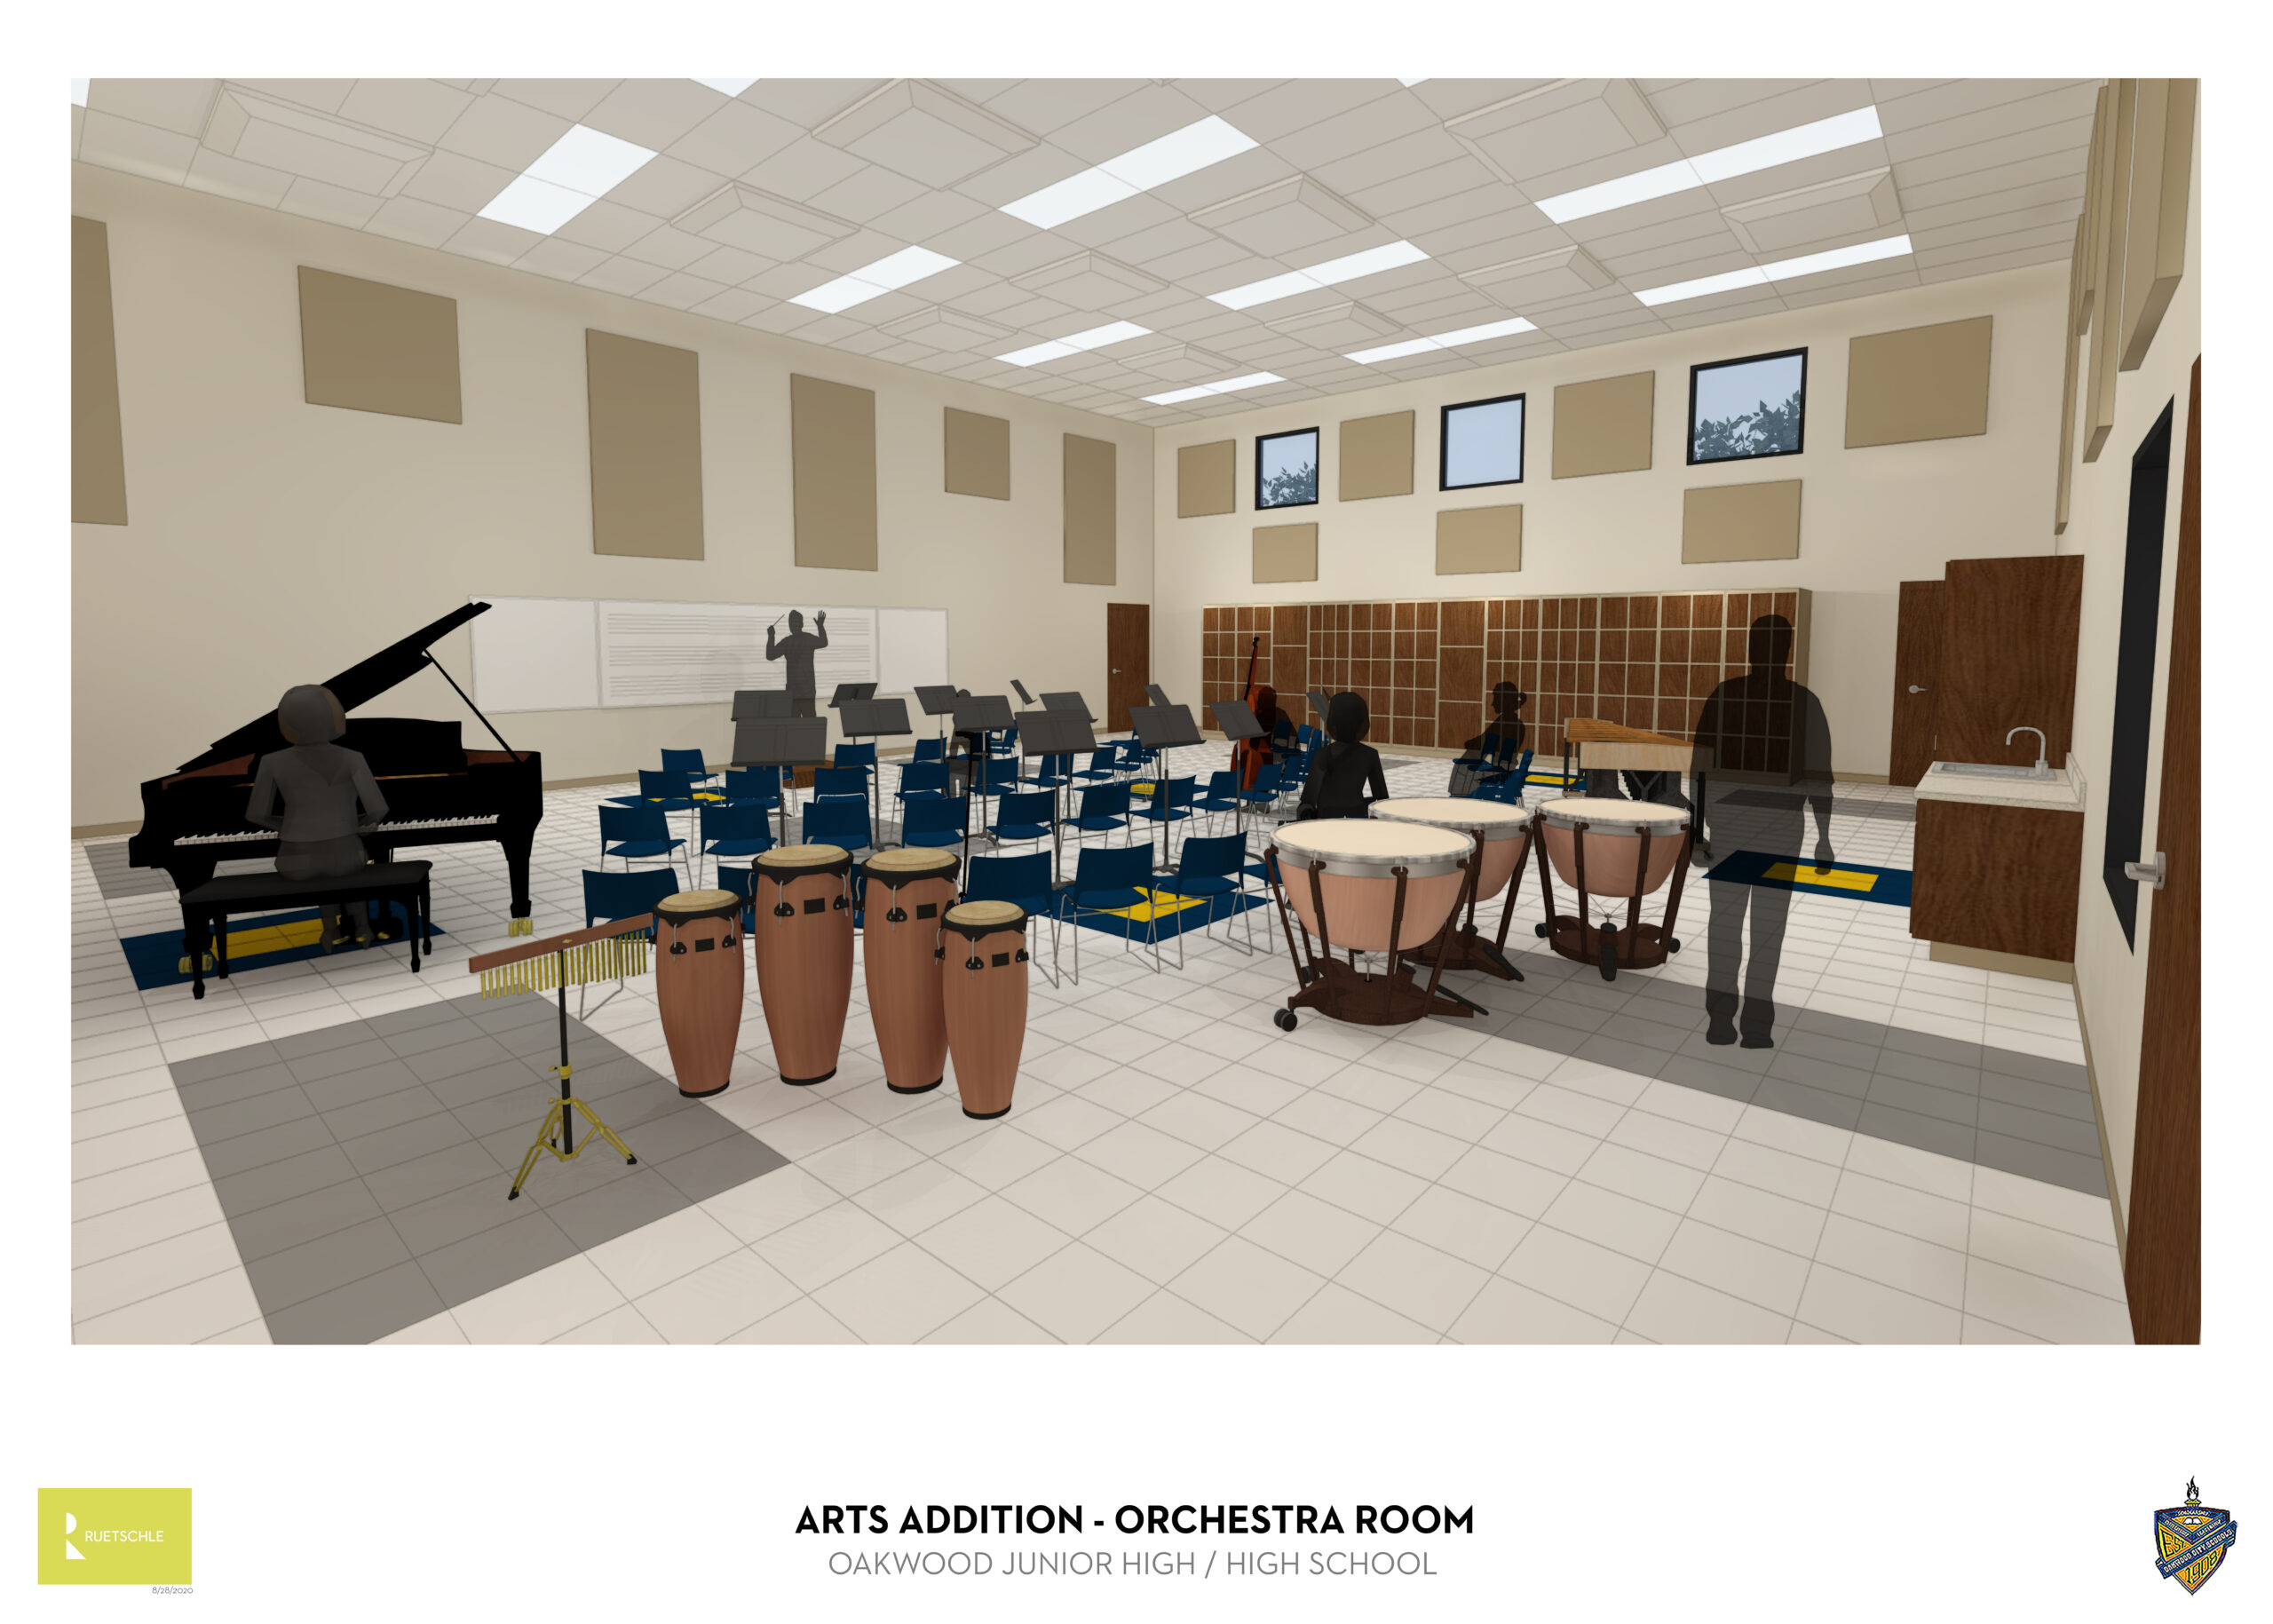 Orchestra room rendering